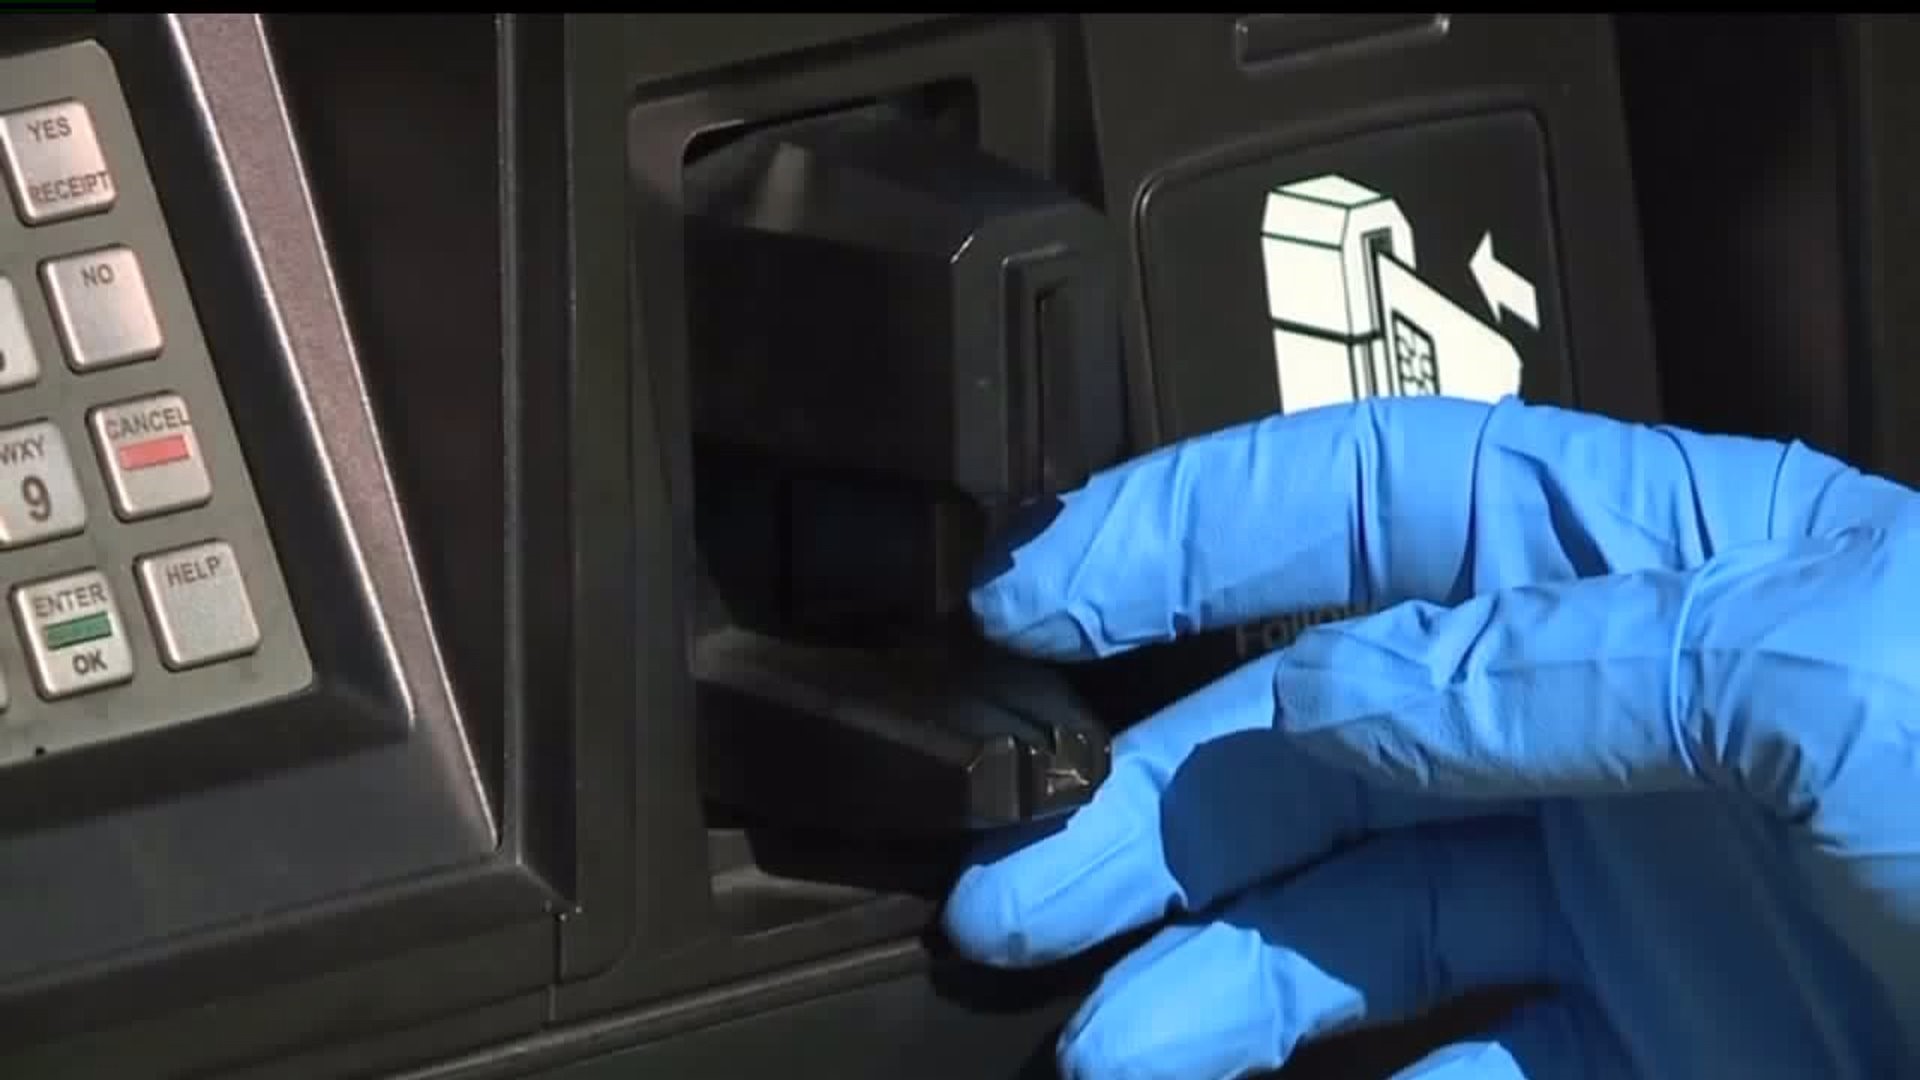 Card skimming inspections